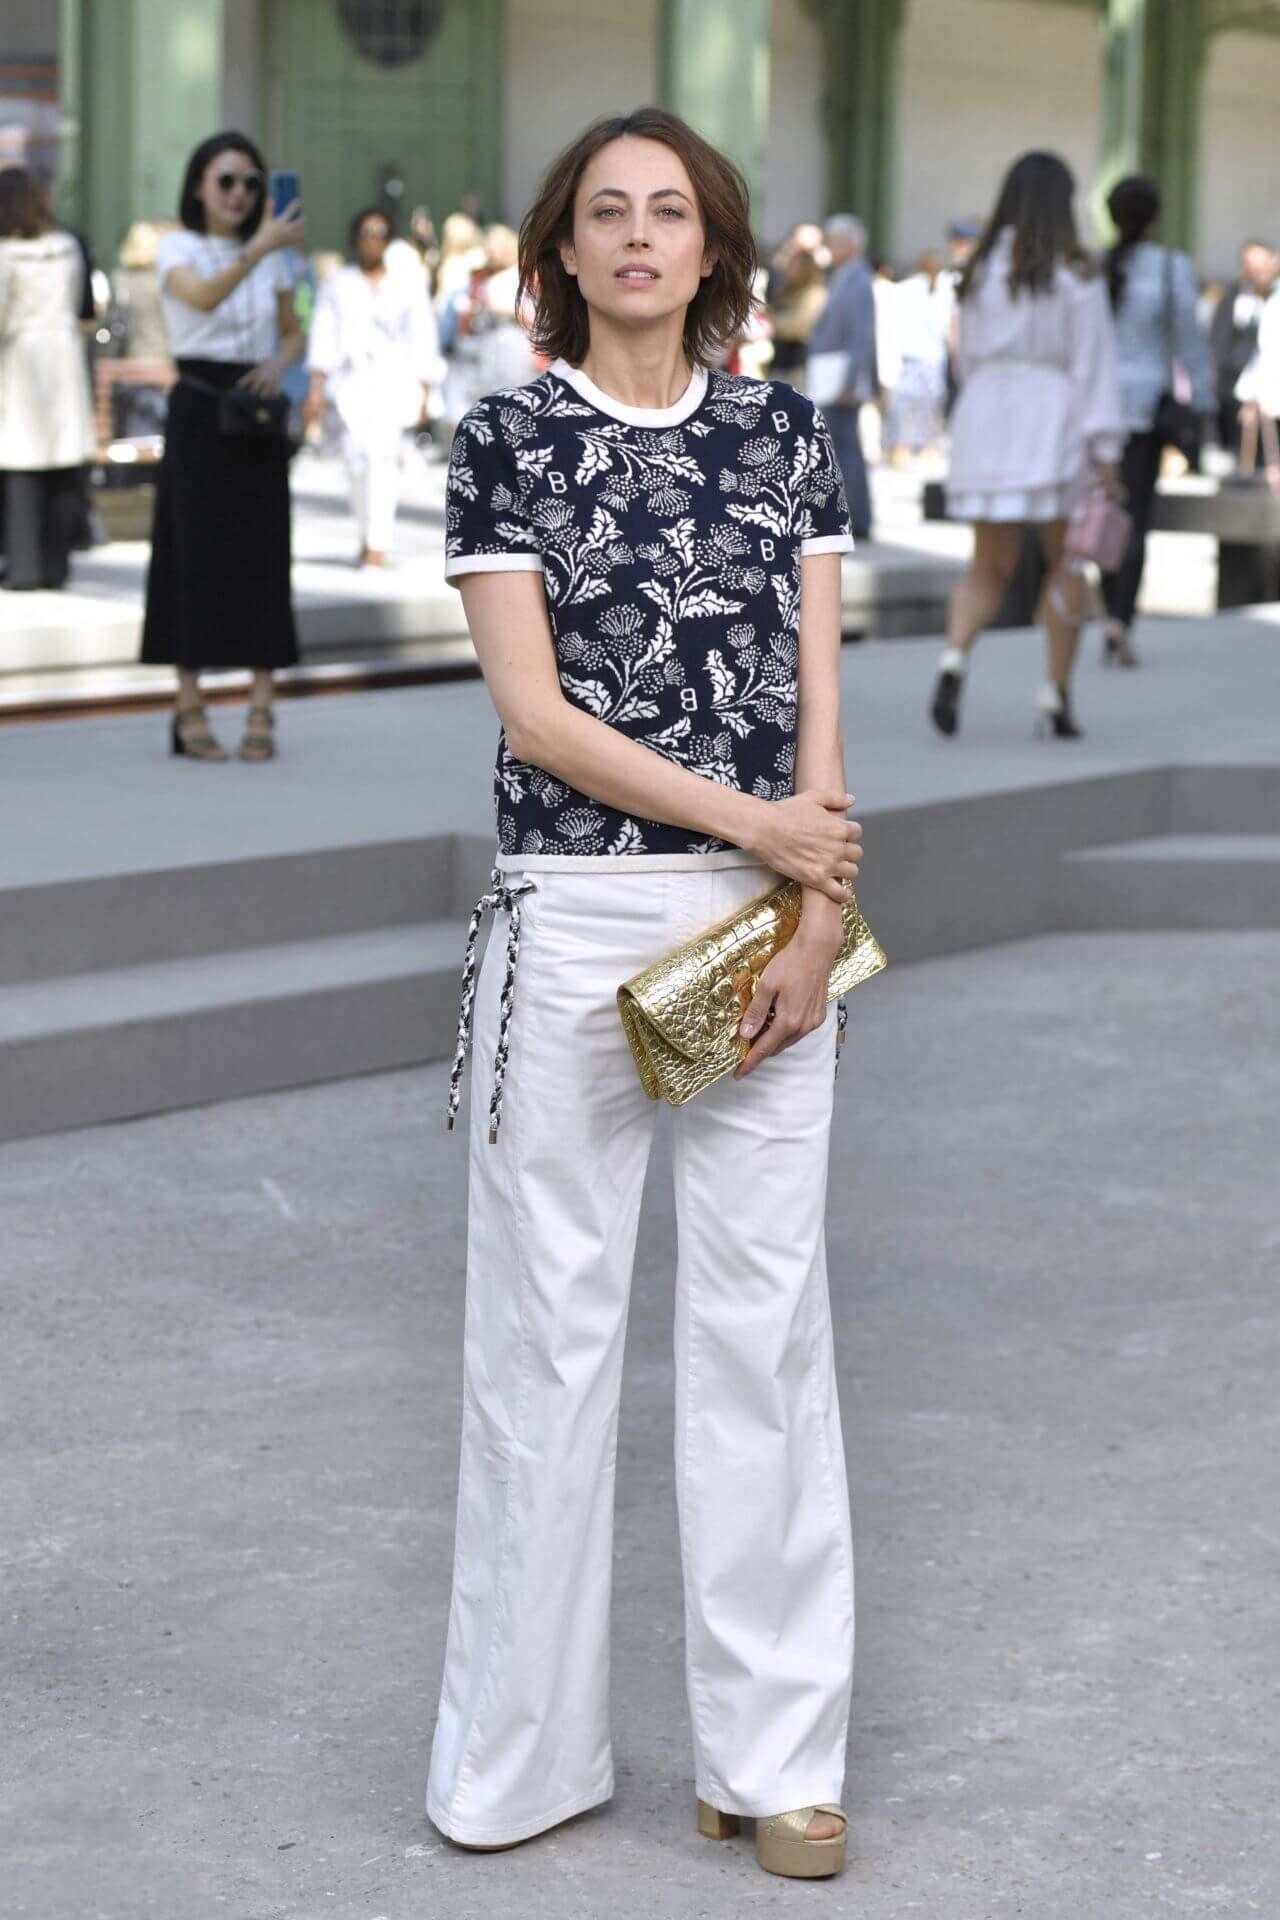 Anne Berest In Blue With White Border Half Sleeves Top & Pants At  Chanel Cruise Collection Photocall in Paris